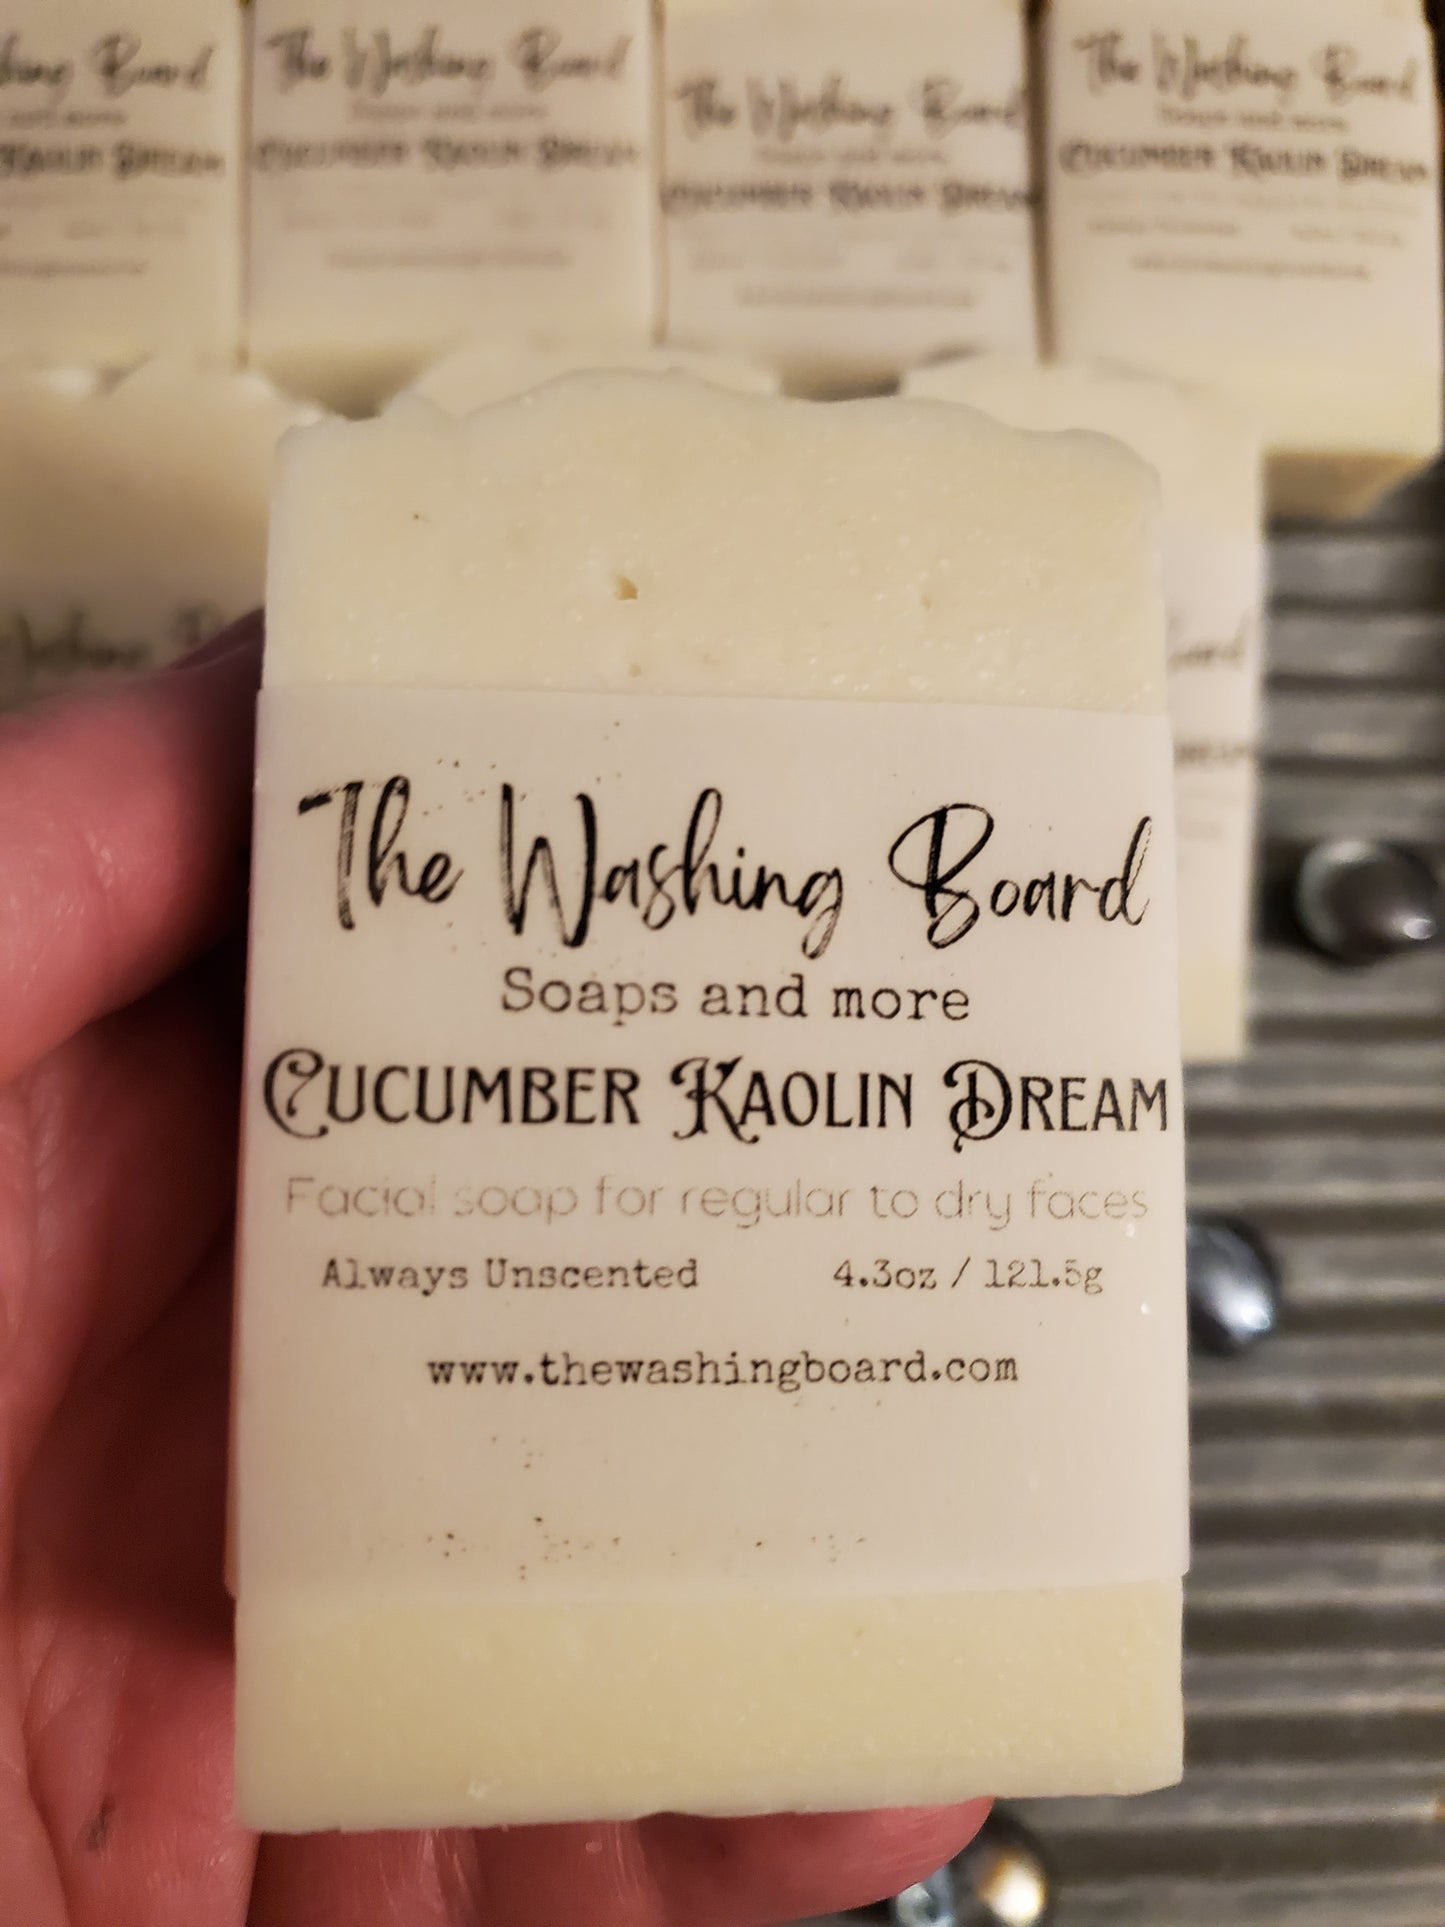 Cucumber Kaolin Dream being held by a woman's hand above a wash board.